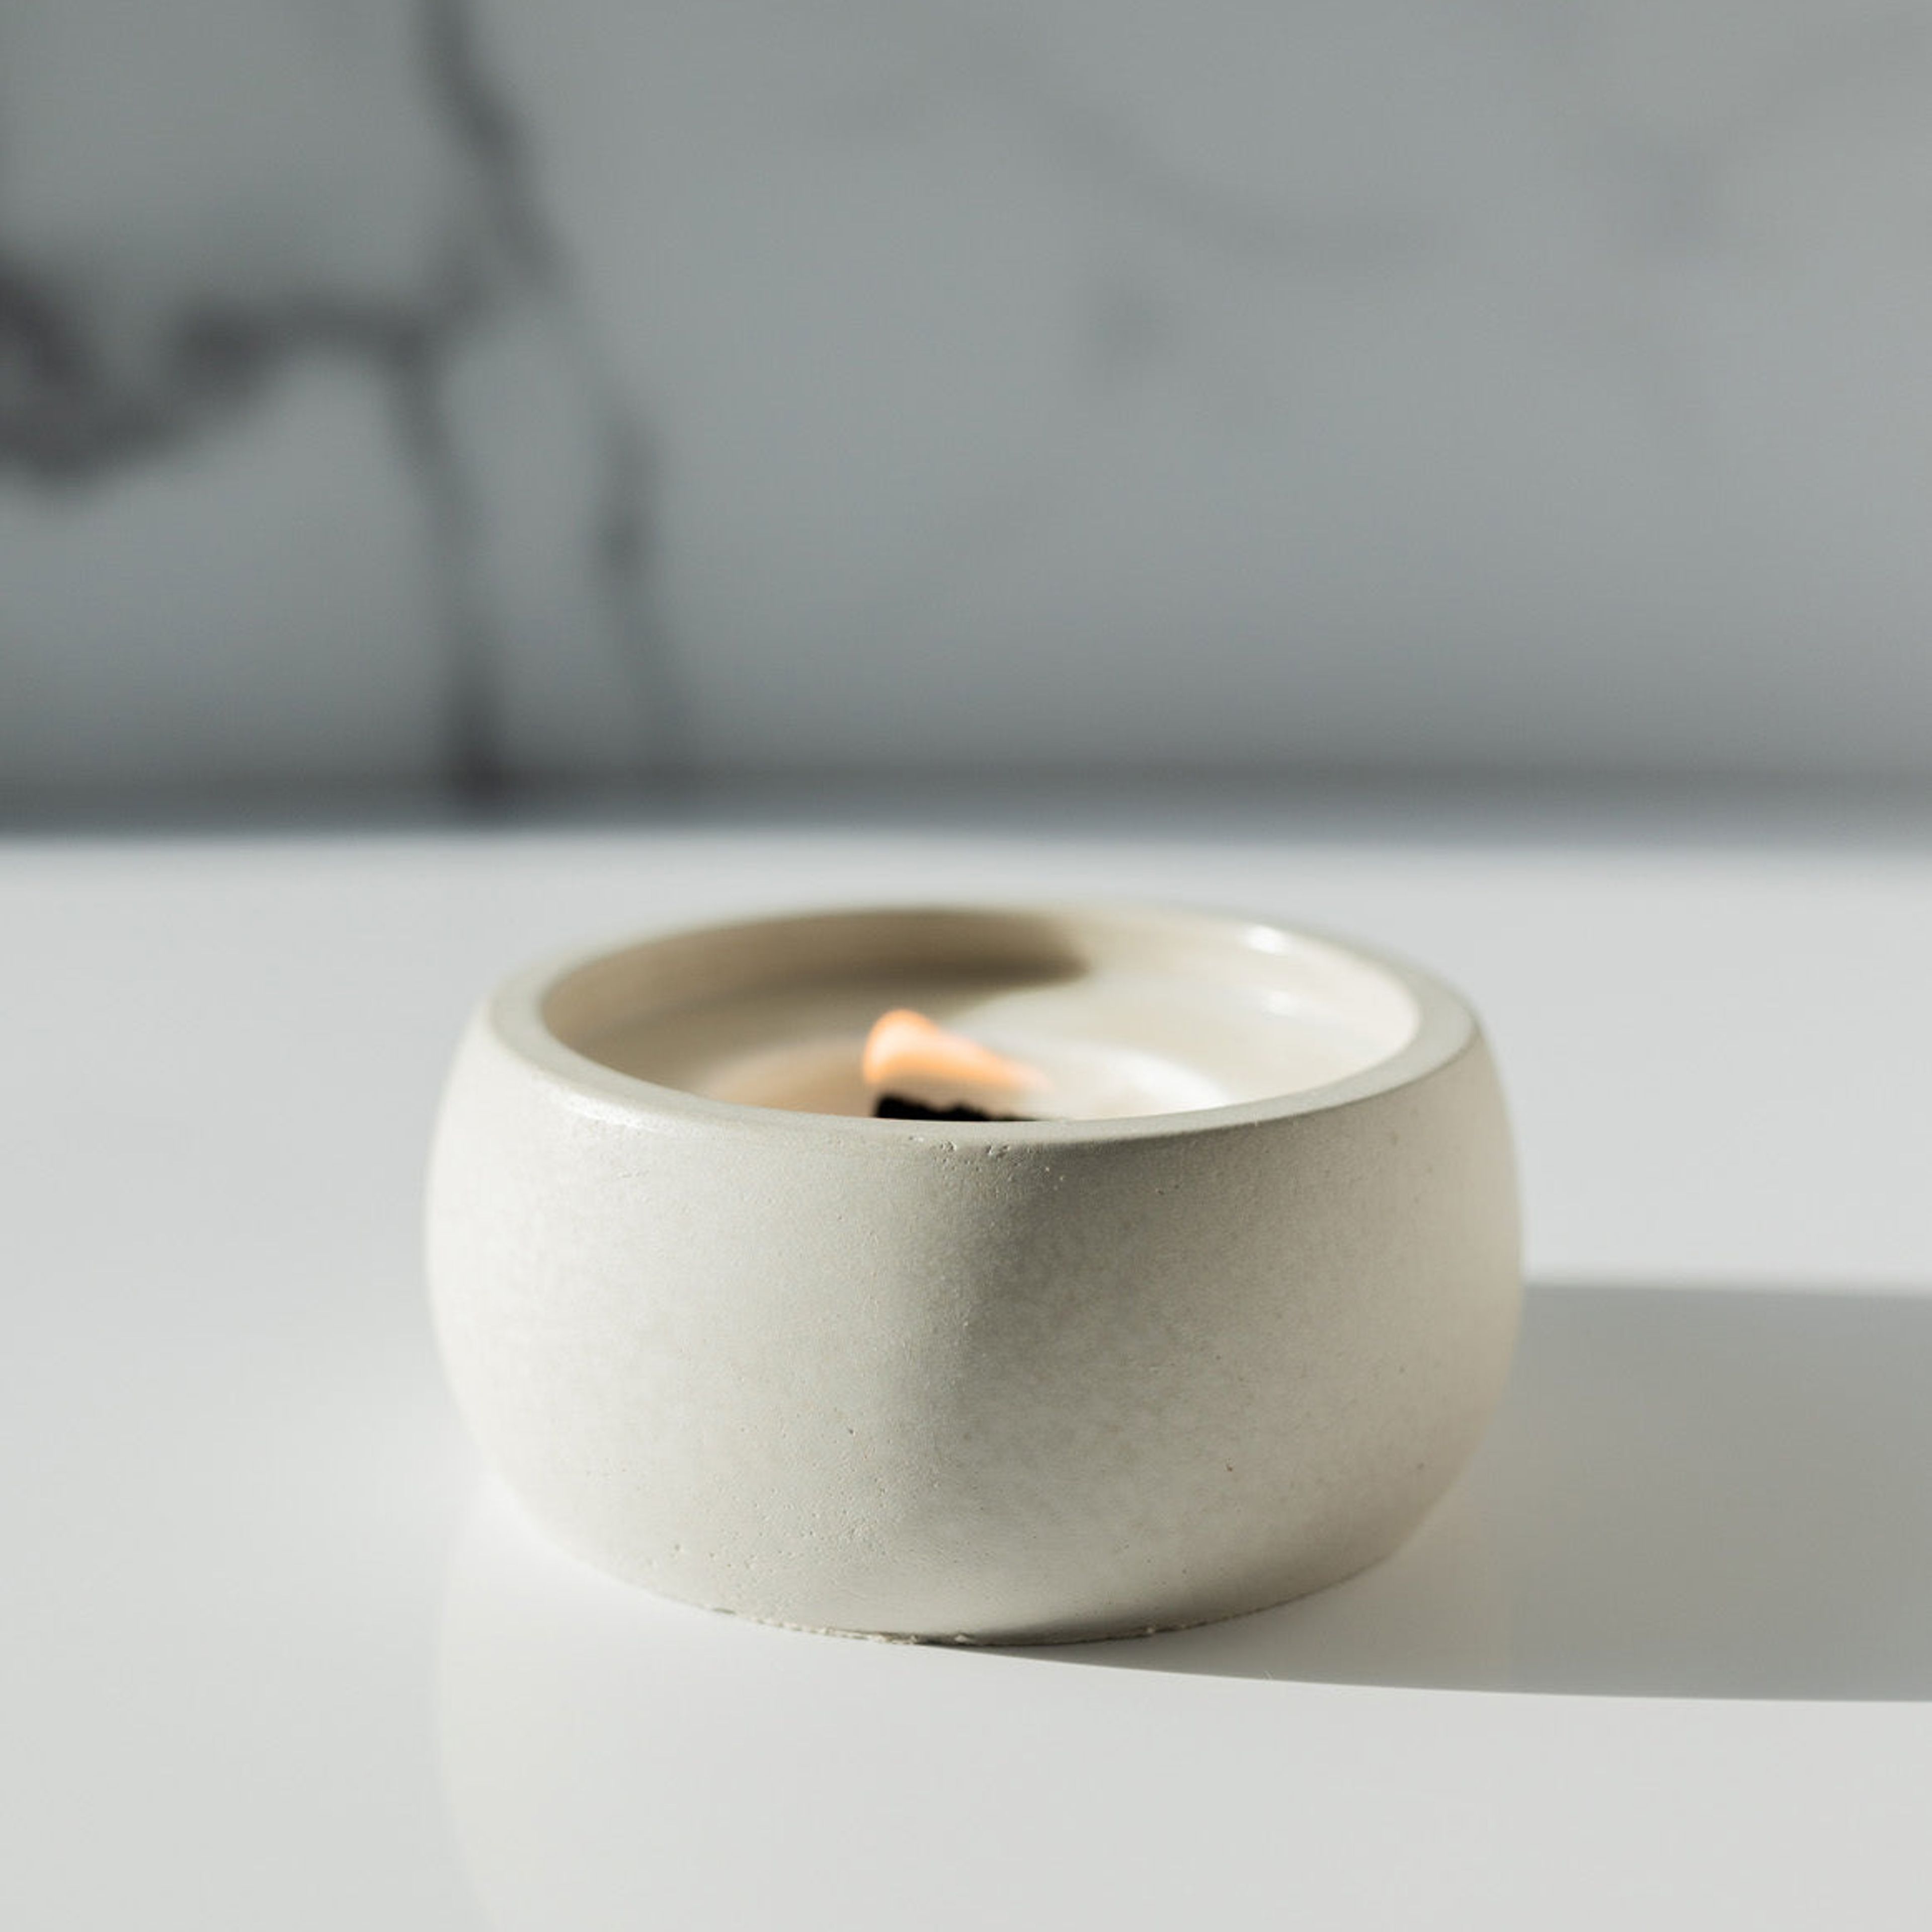 Mojave Dreams Coconut Soy Candle - Concrete Wooden Wick Vessel